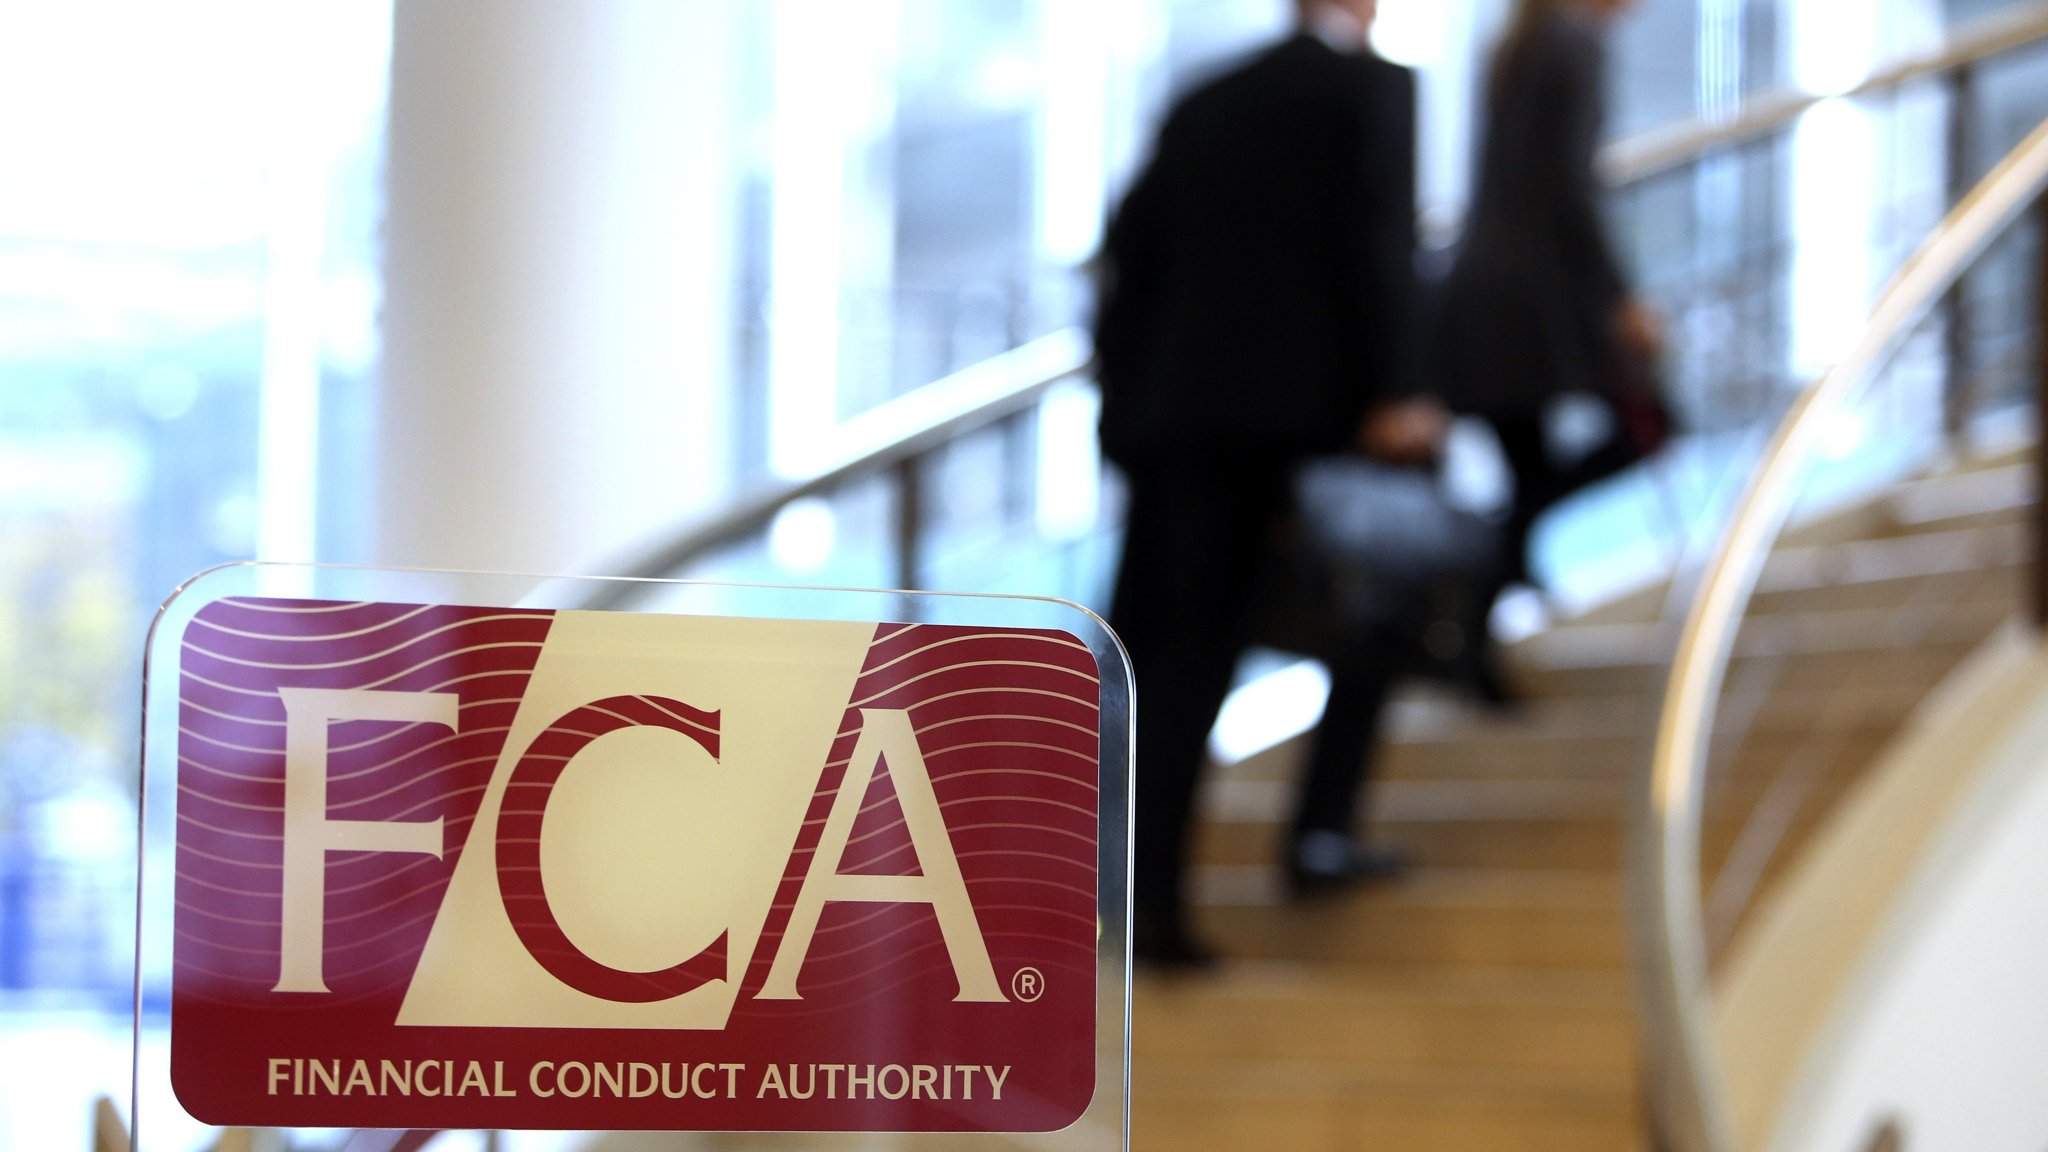 THE DEBT ADVISOR GAINS FULL AUTHORISATION FROM THE FINANCIAL CONDUCT AUTHORITY